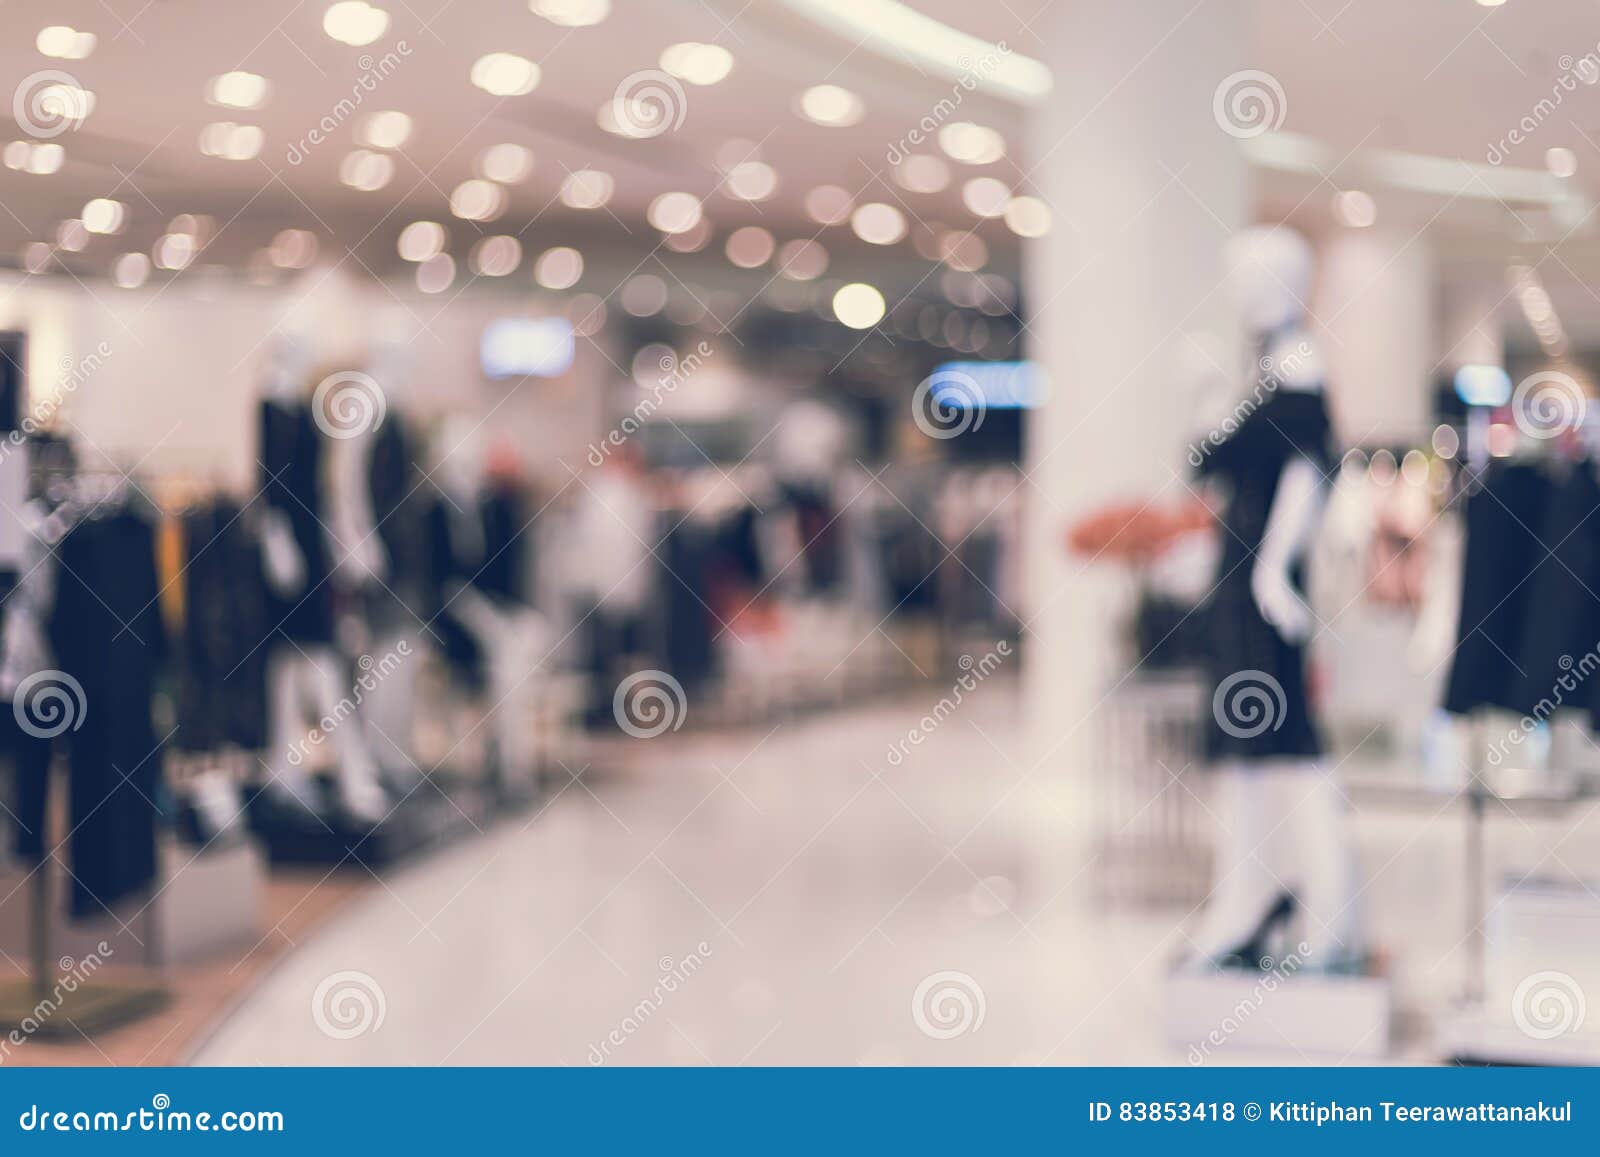 abstract blurred background of department store in shopping mall